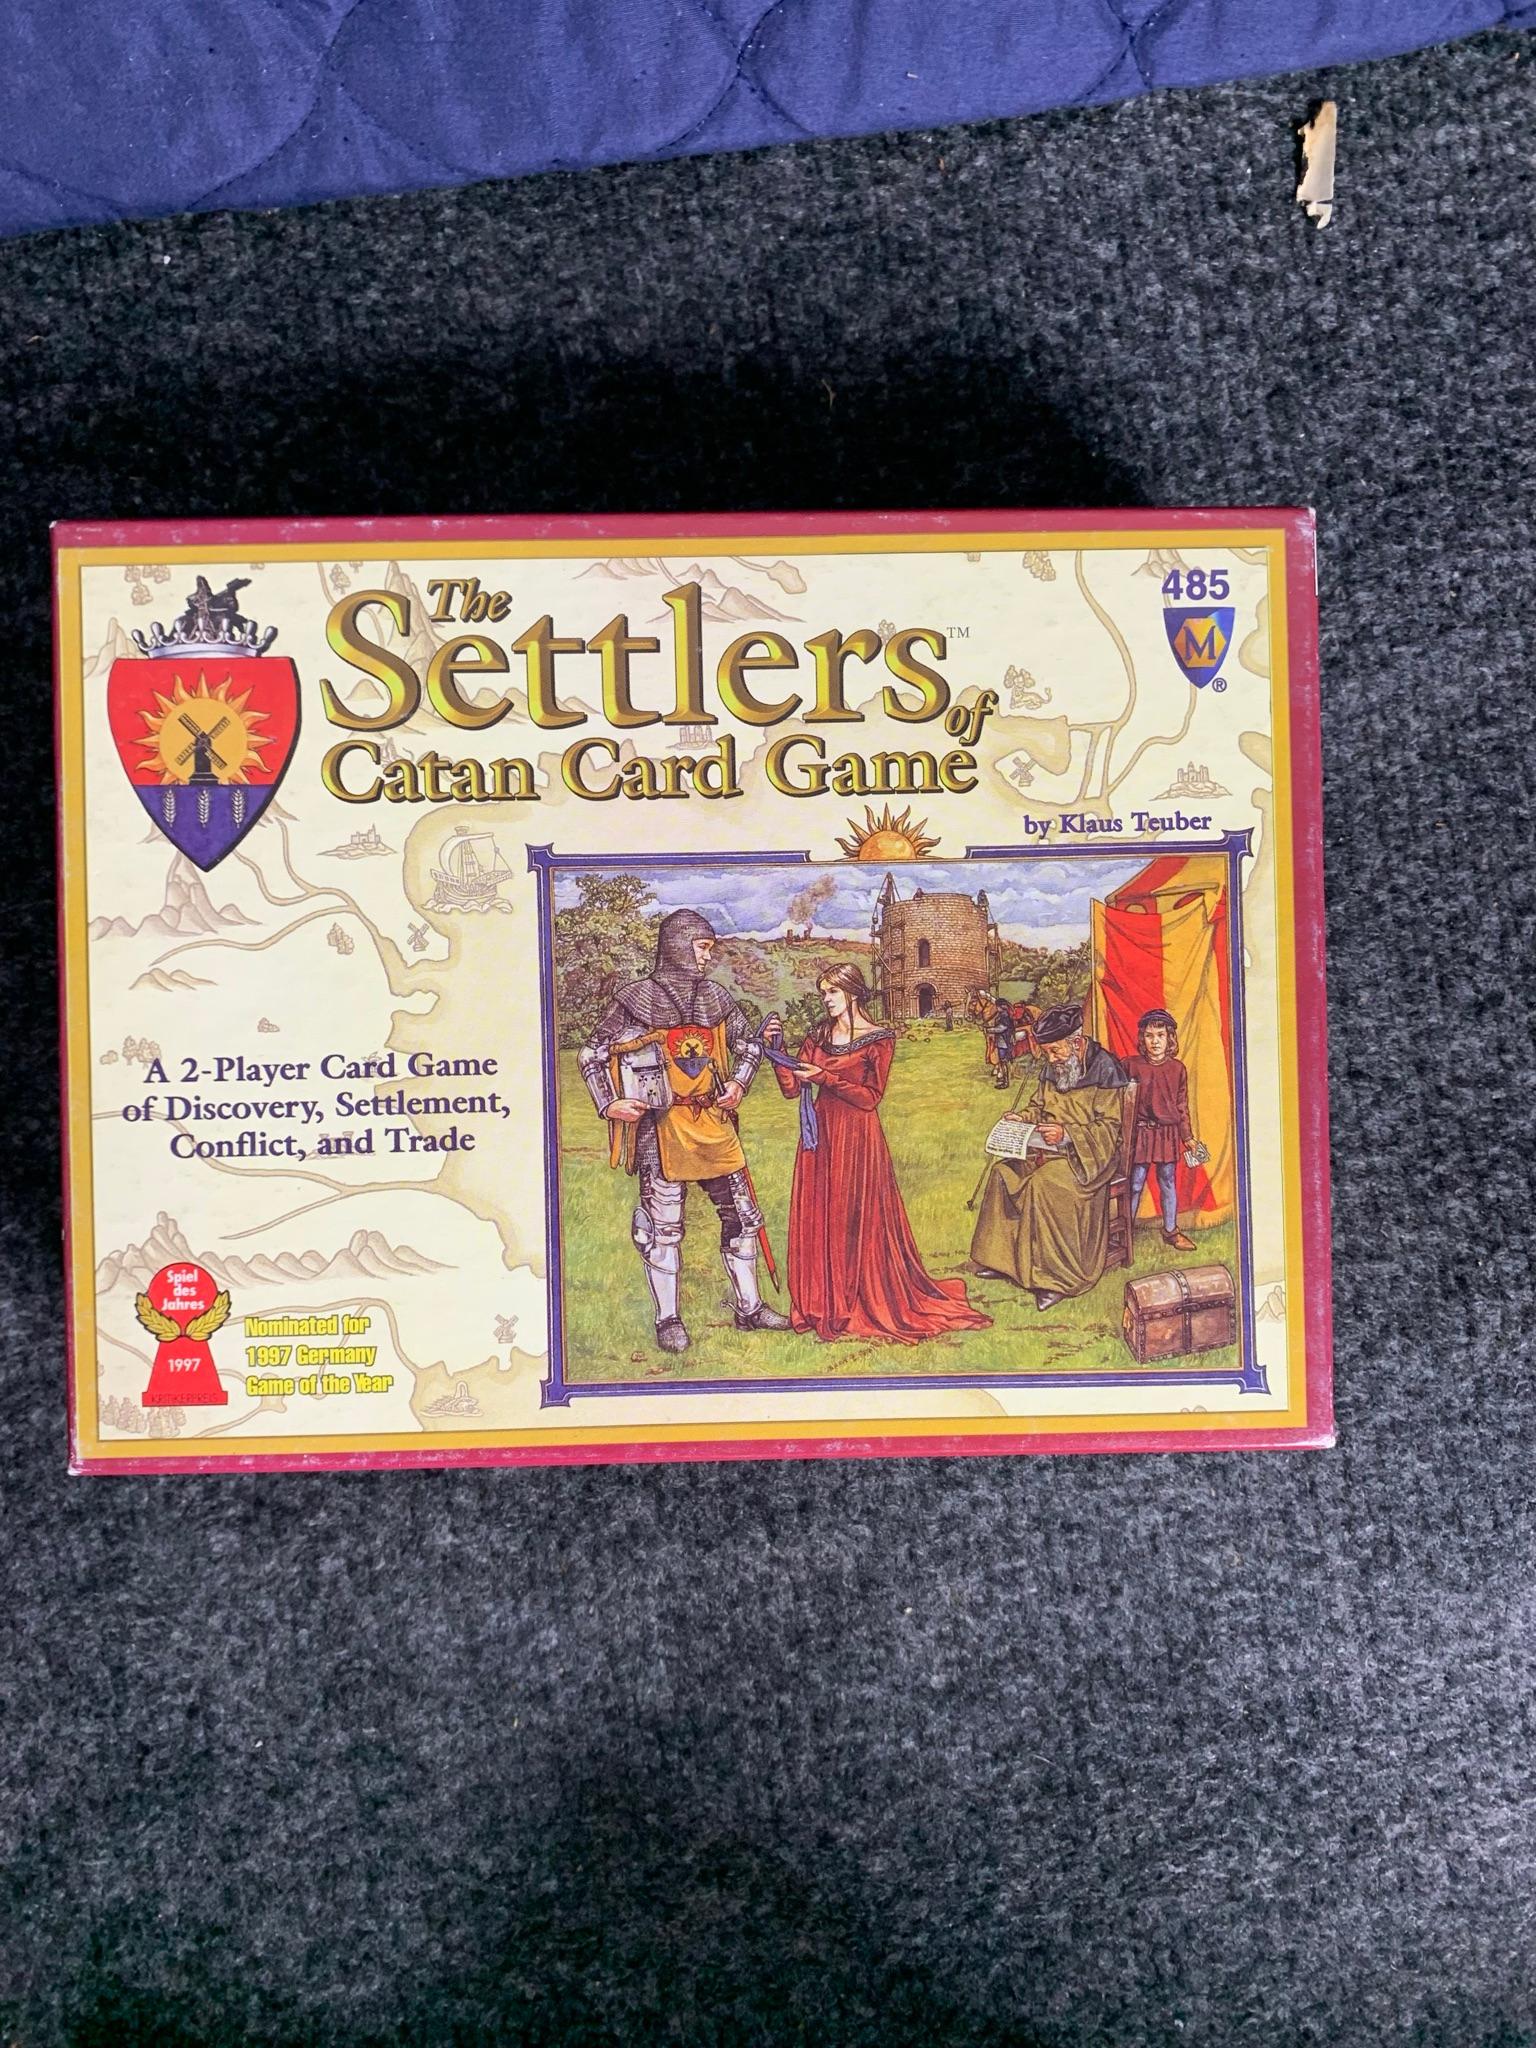 Nottingham, R-Eco, Terra, The Settlers of Catan Card Game, Toppo, Traders of Carthage